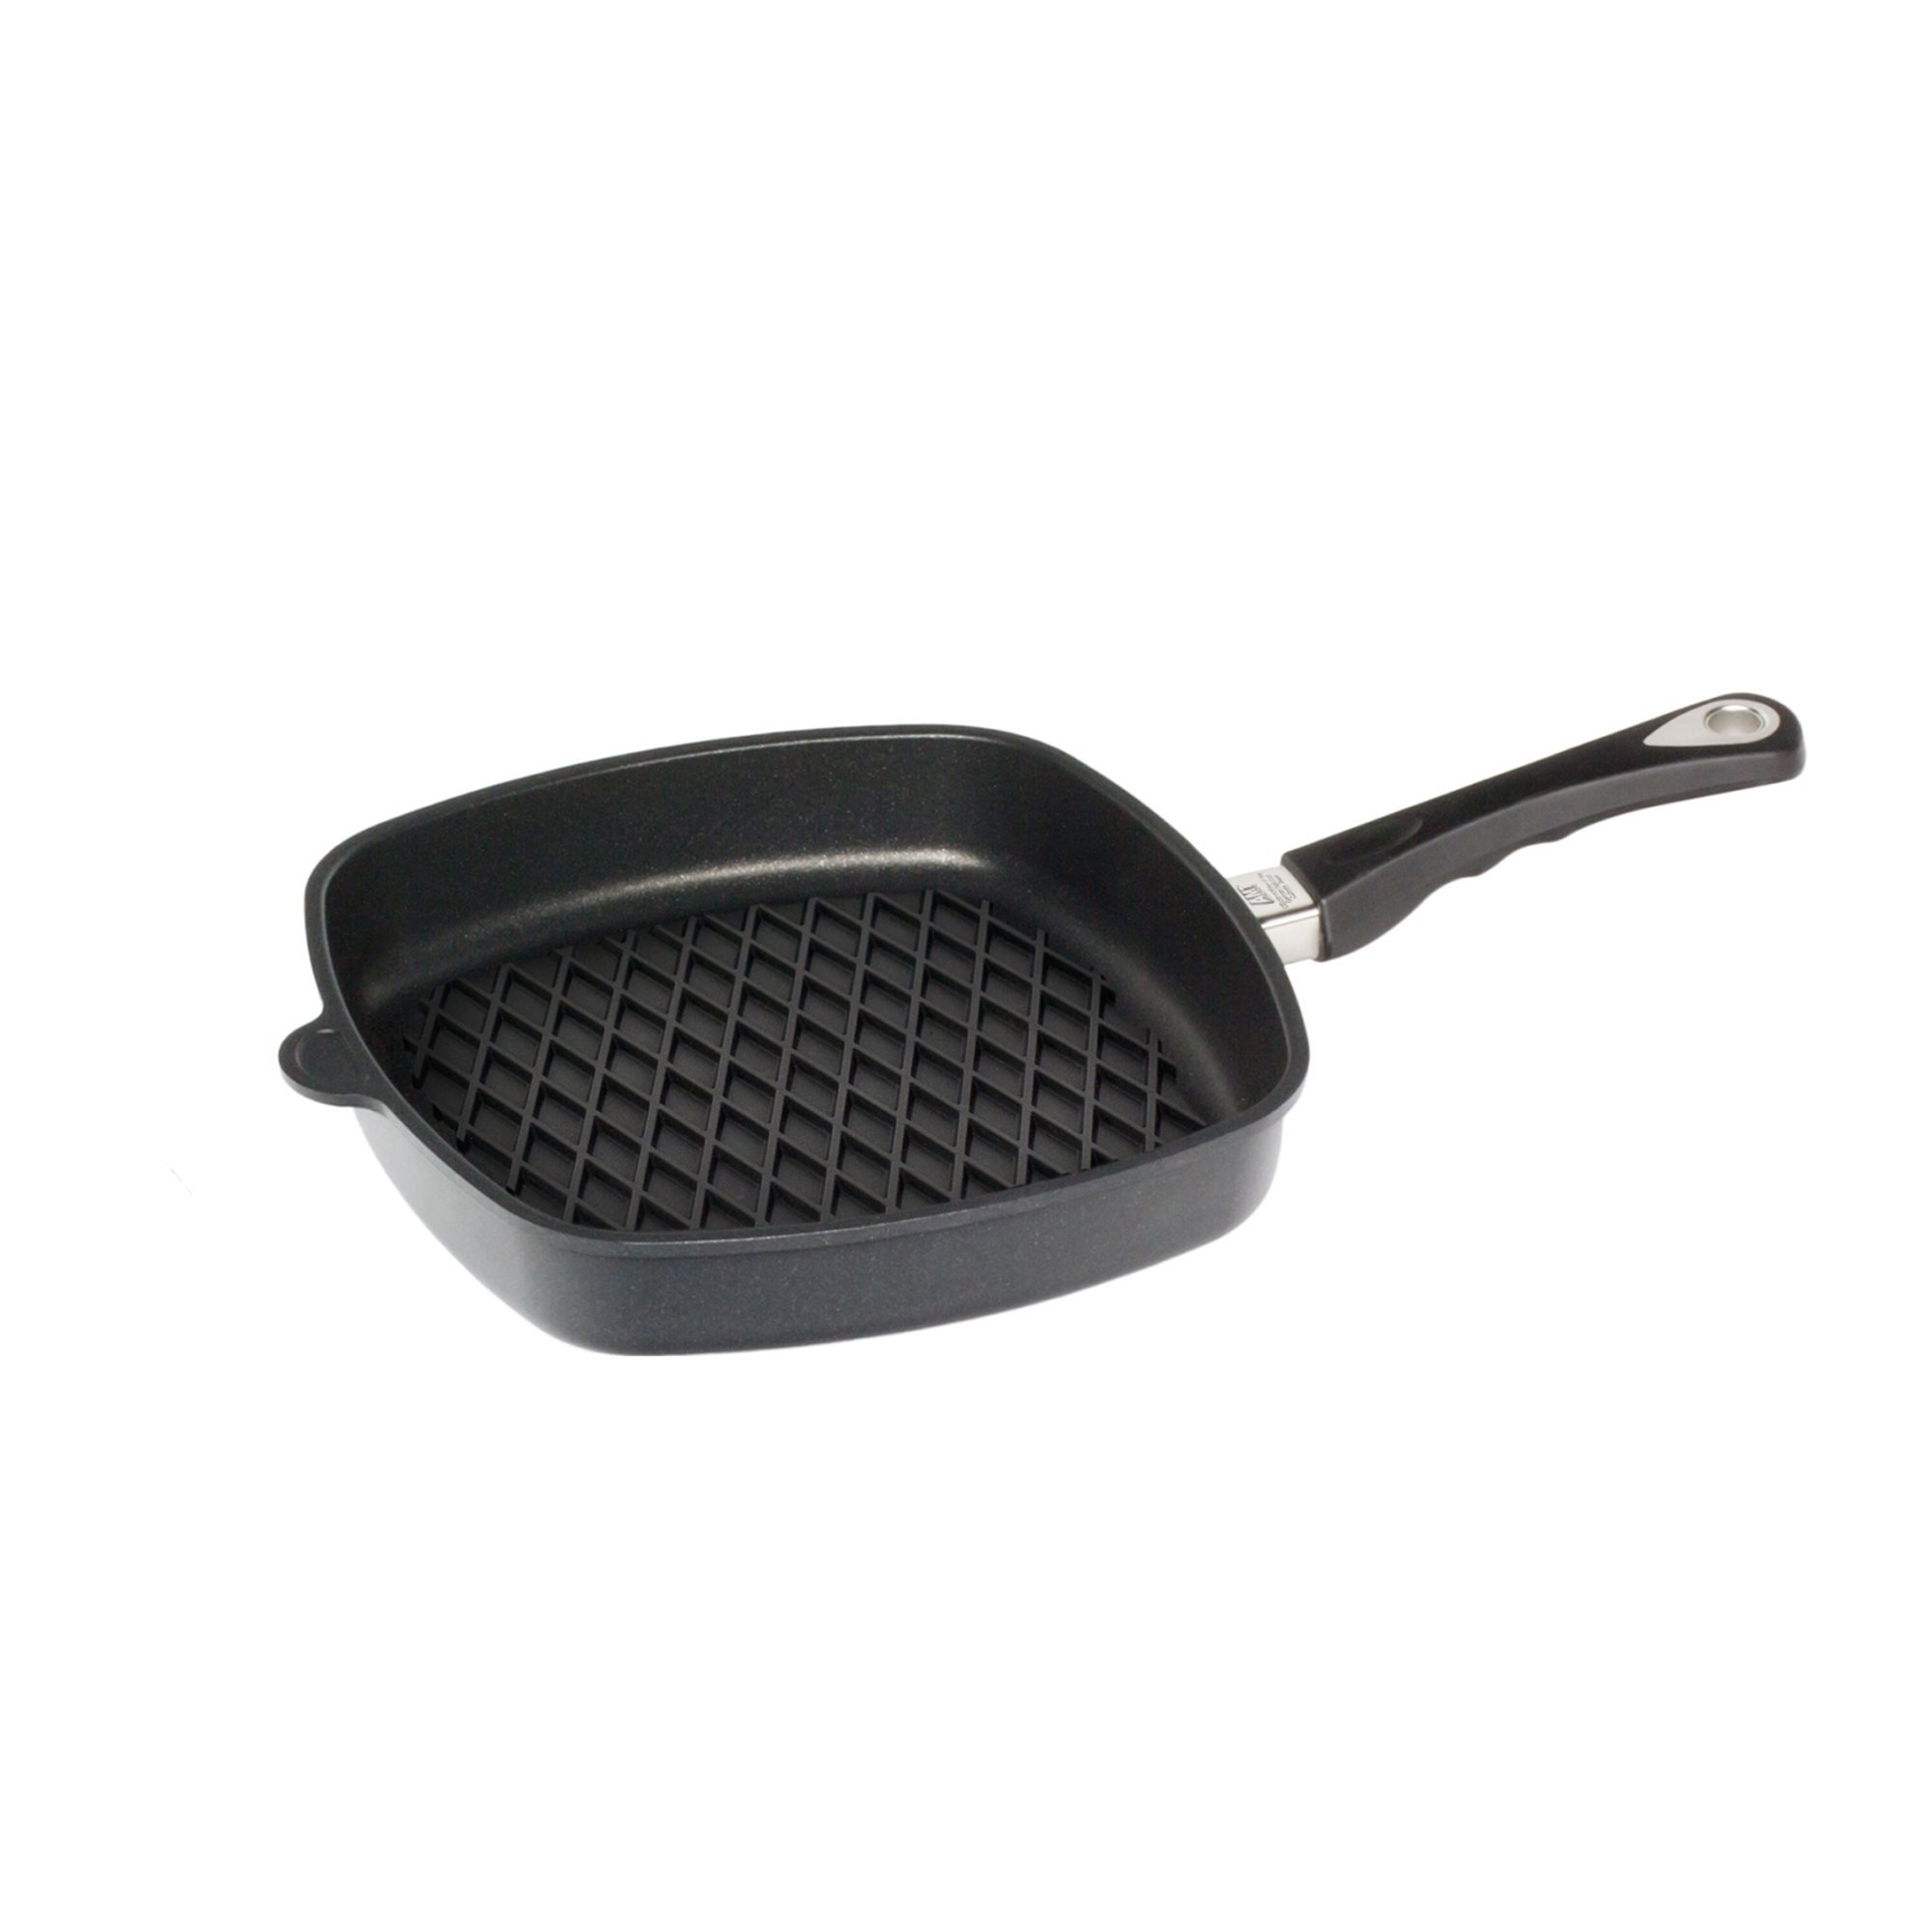  Artesa Small Frying Pan, Cast Iron, Non Stick, with